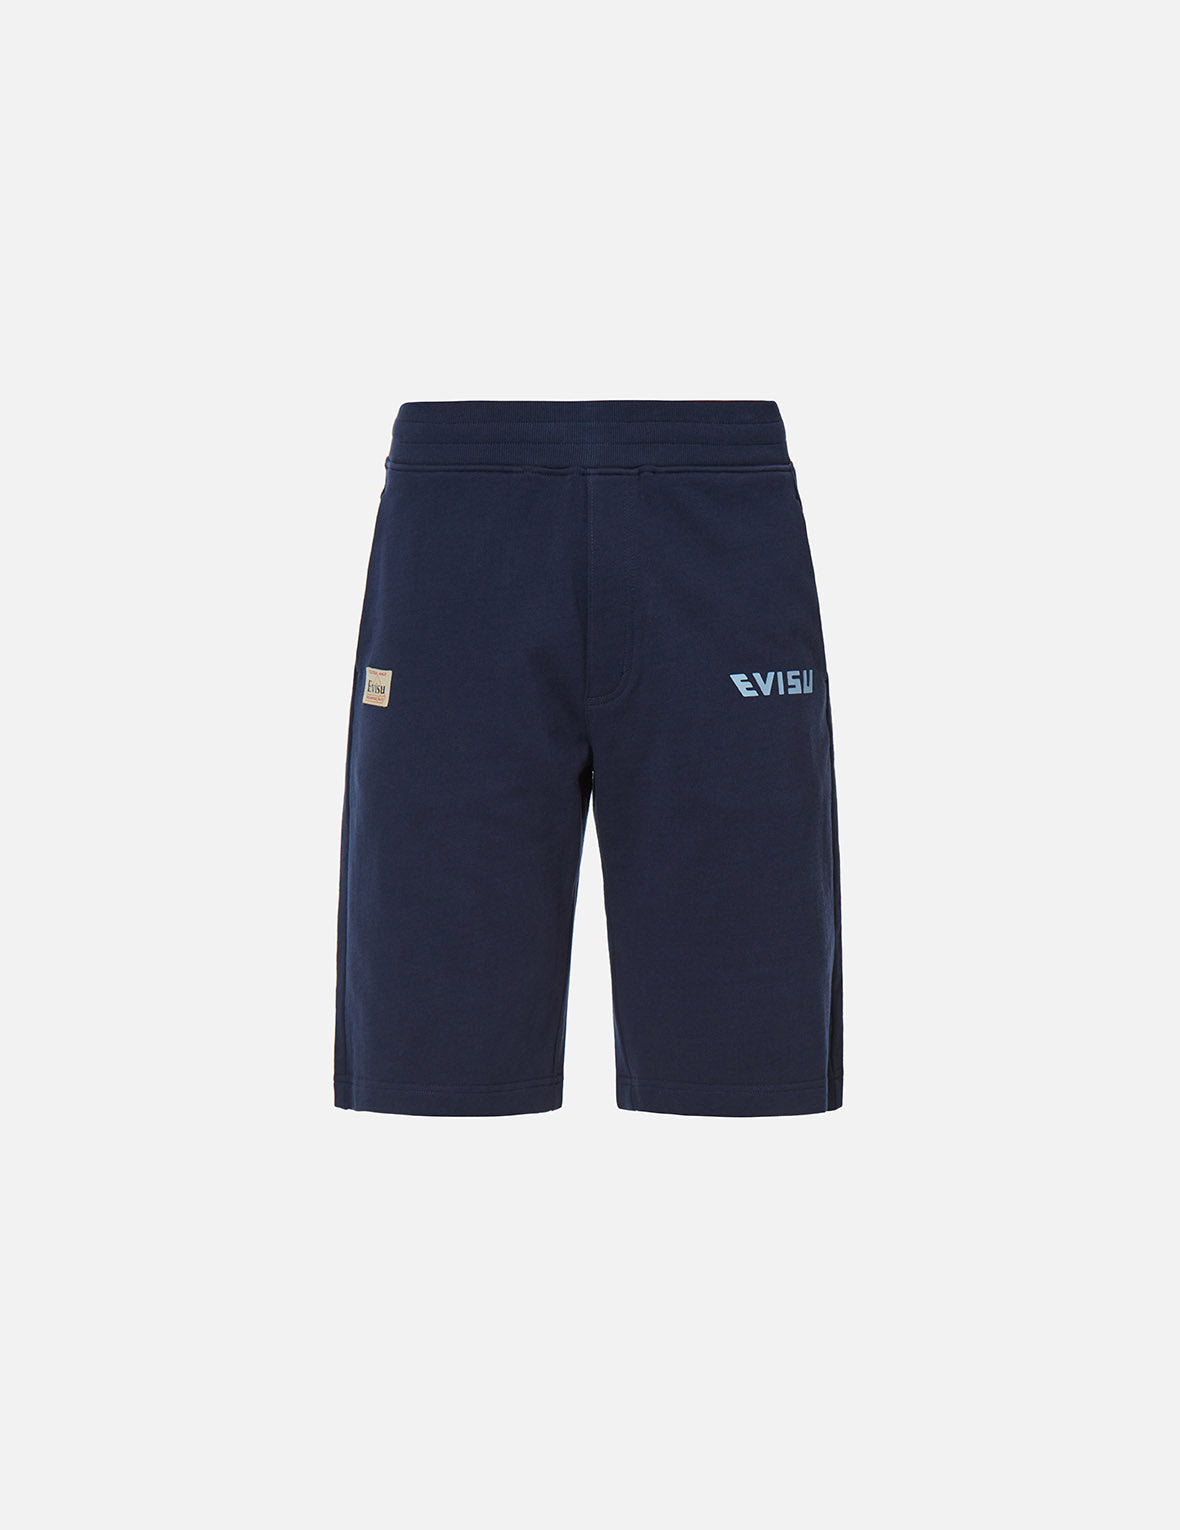 Evisu Godhead and Ebisu Pattern Daicock Sweat Shorts ( New Collection ) - Shop Streetwear, Sneakers, Slippers and Gifts online | Malaysia - The Factory KL